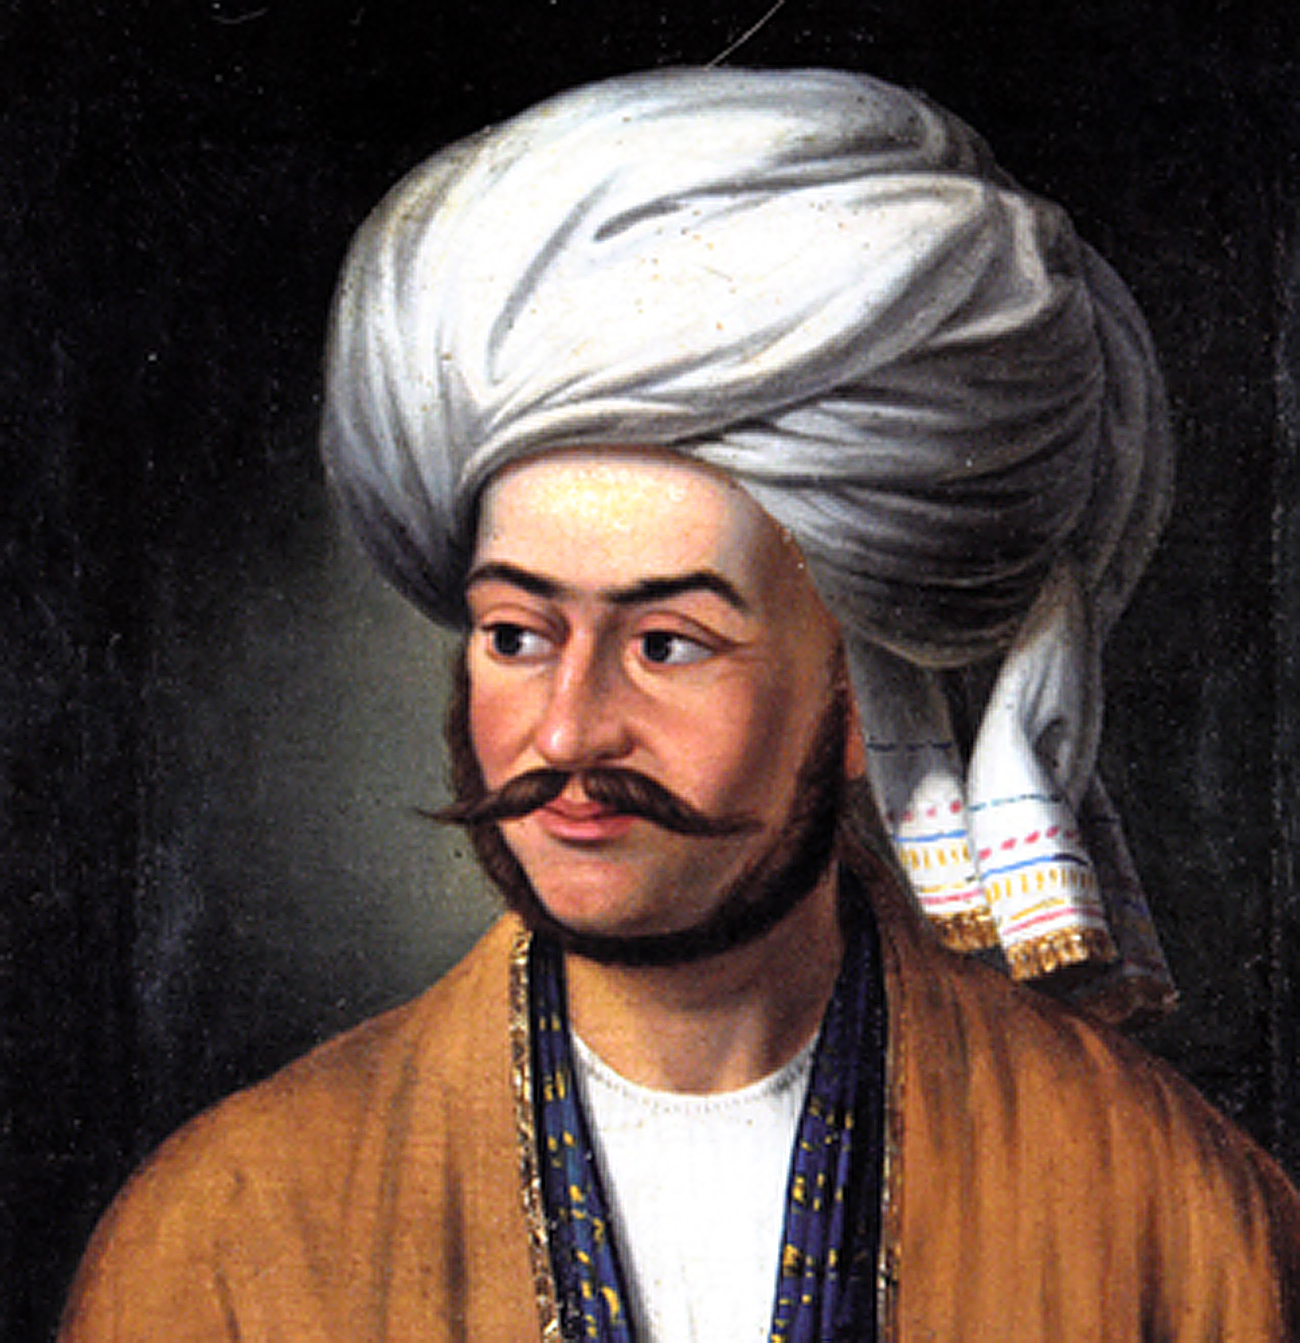 A portrait of Ivan (Jan) Vitkevich dressed in traditional Central Asian attire.  Source: wikipedia.org